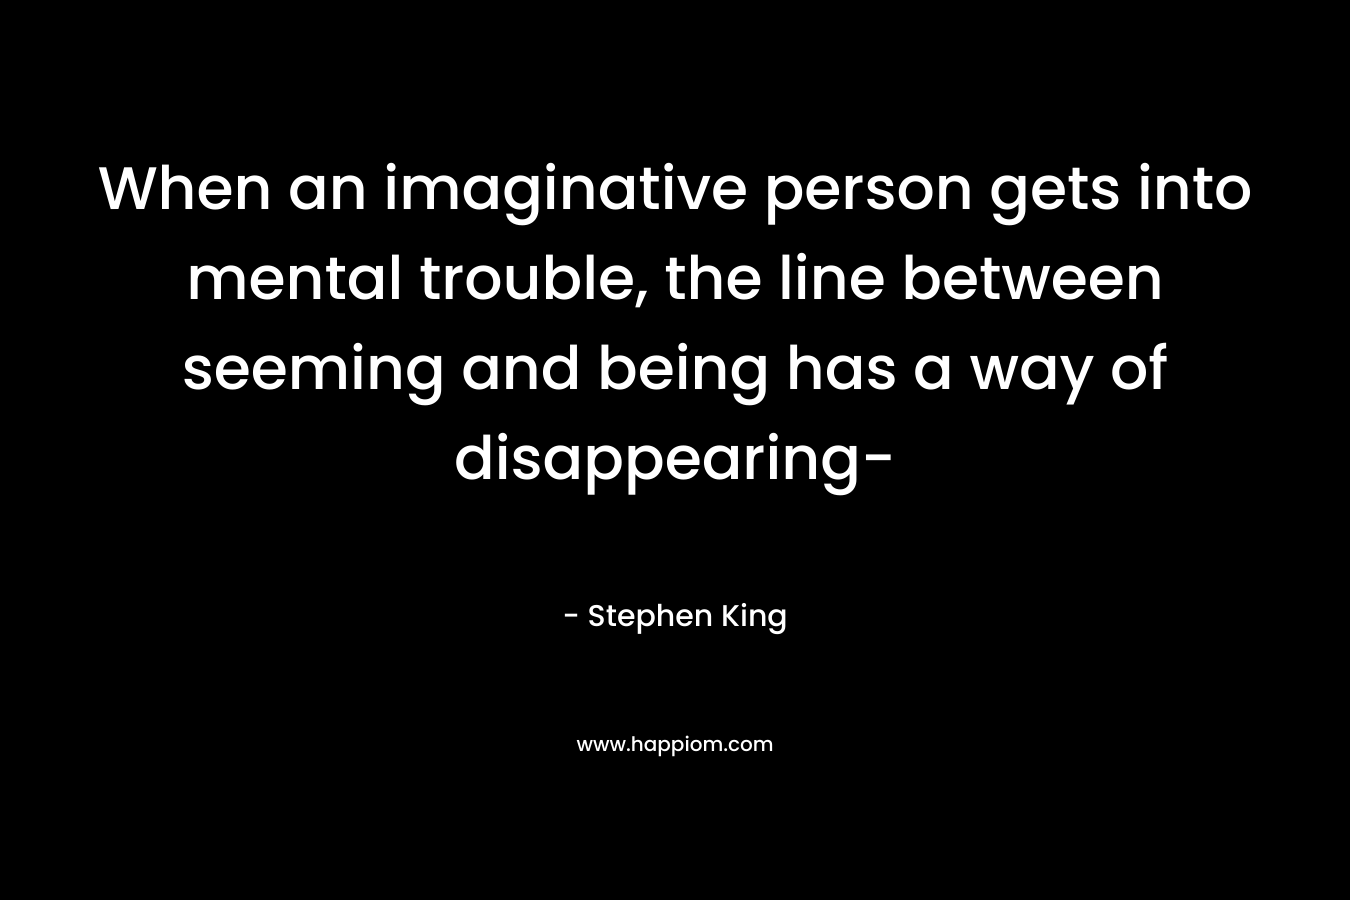 When an imaginative person gets into mental trouble, the line between seeming and being has a way of disappearing- – Stephen King